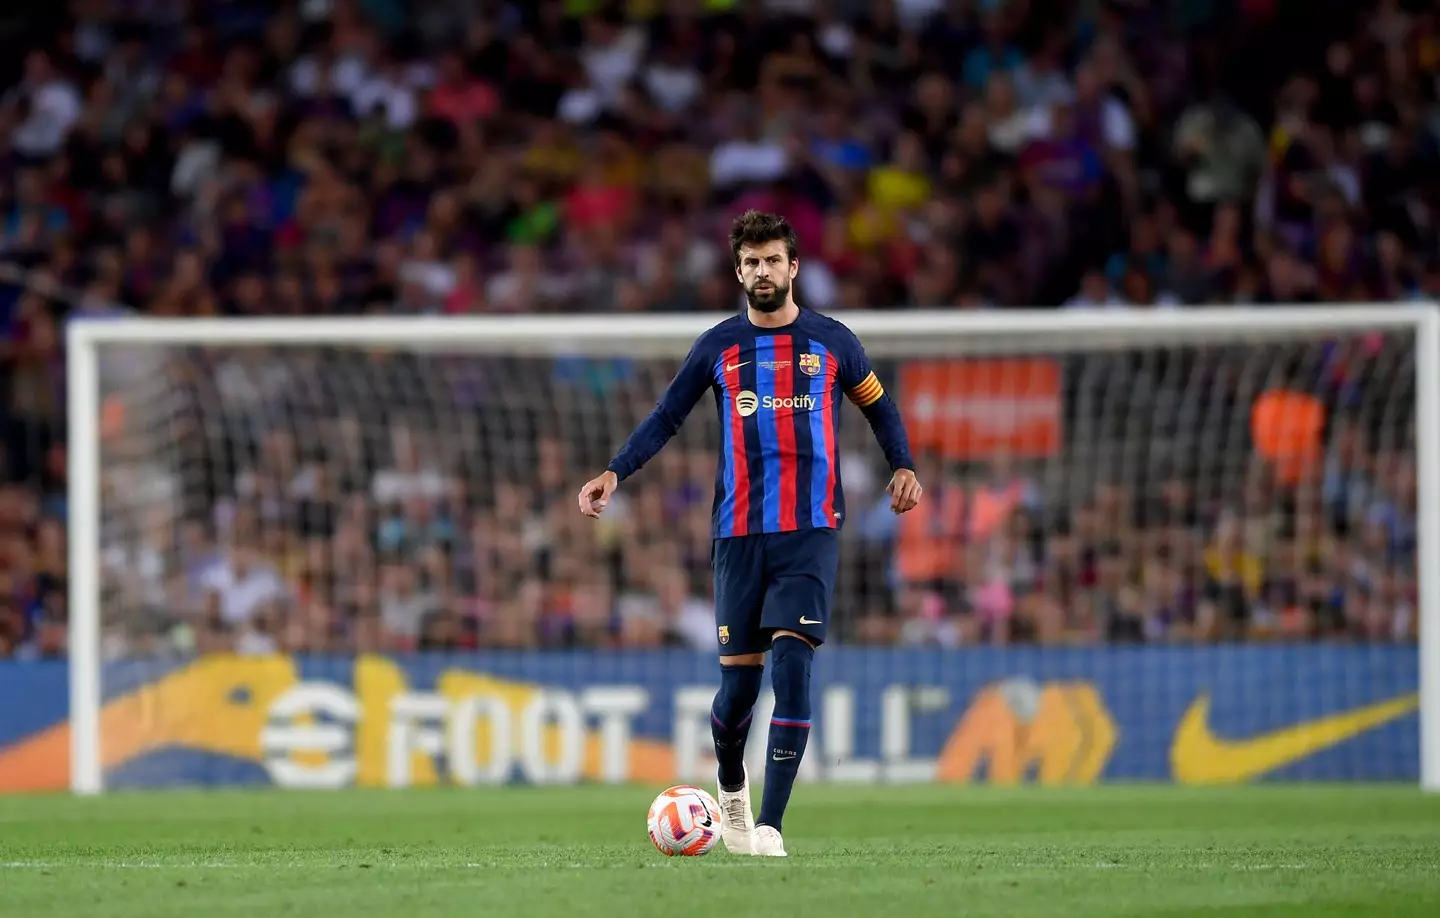 Pique in action during the Joan Gamper Trophy friendly with Pumas UNAM. (Image